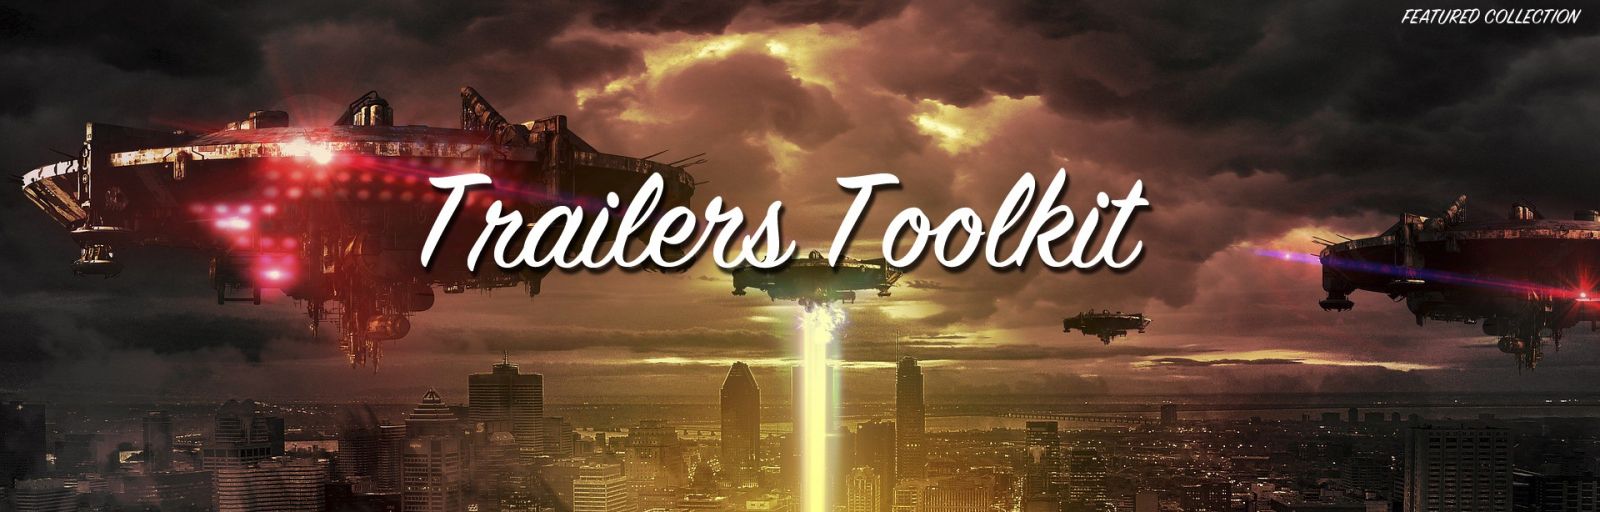 Trailers Toolkit Collection